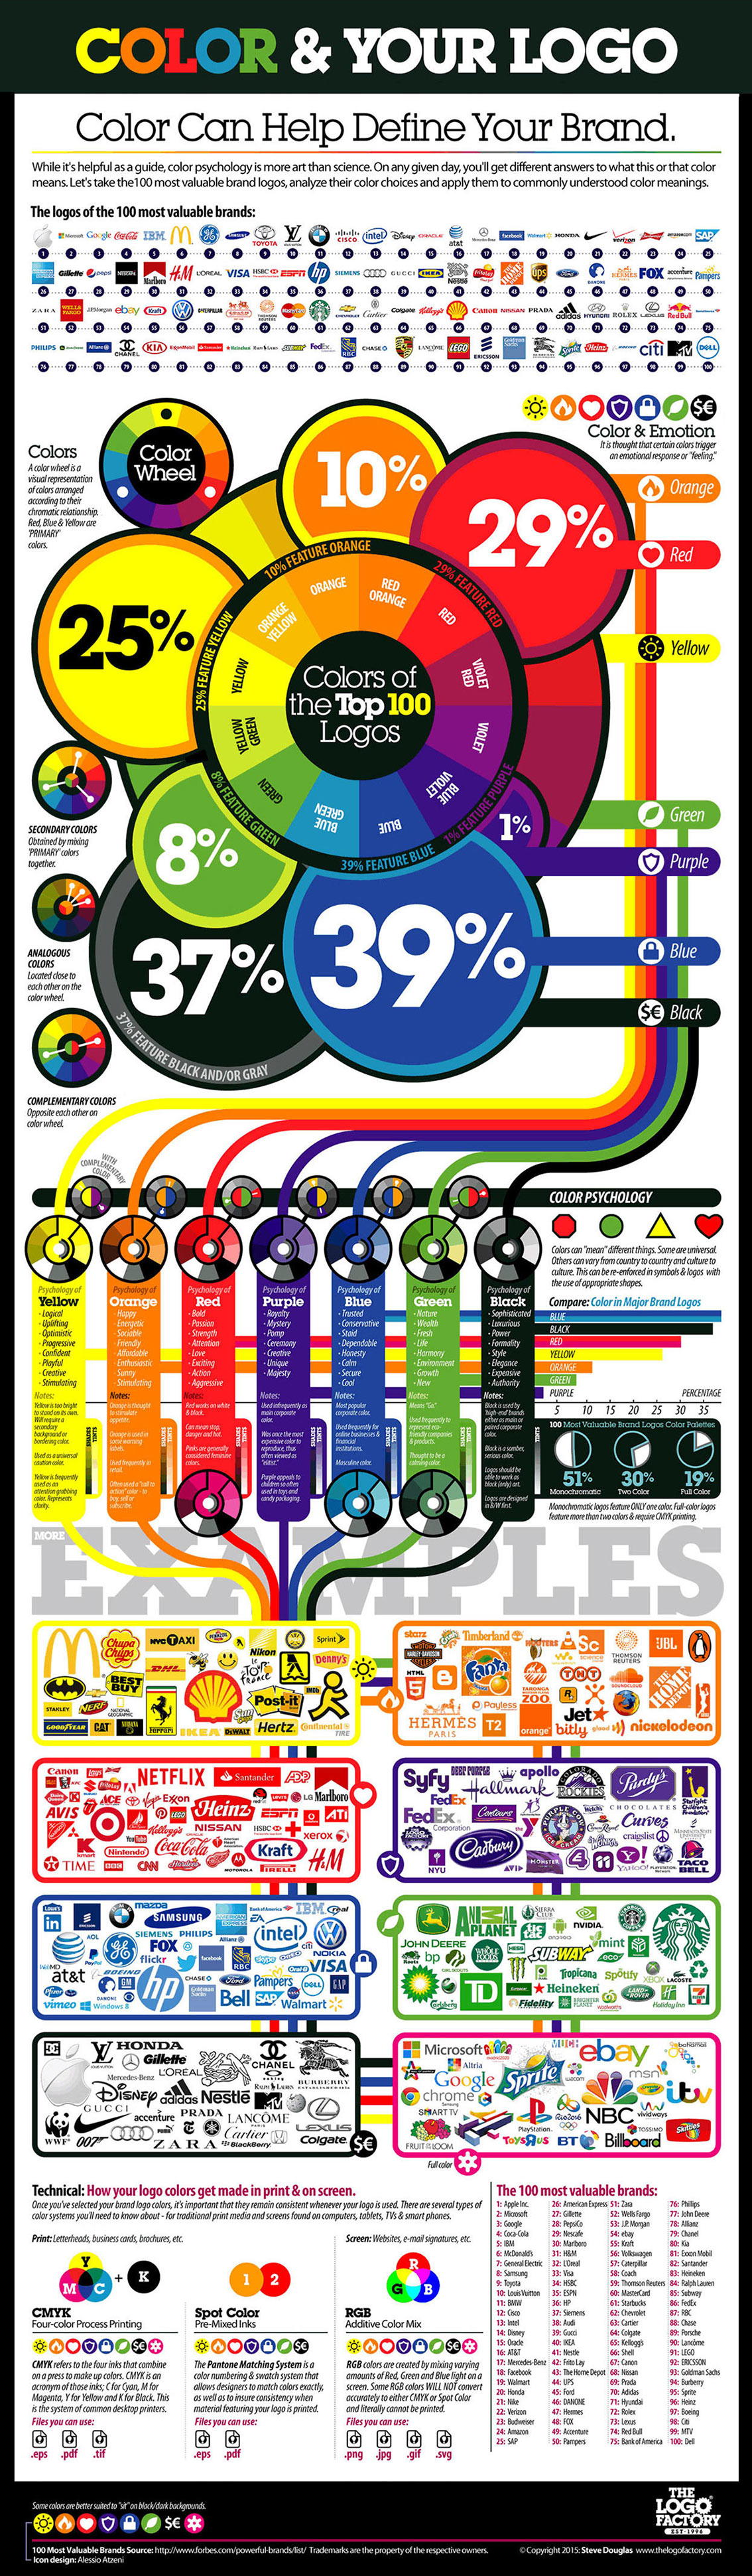 The Best Colors for Logo Design Infographic